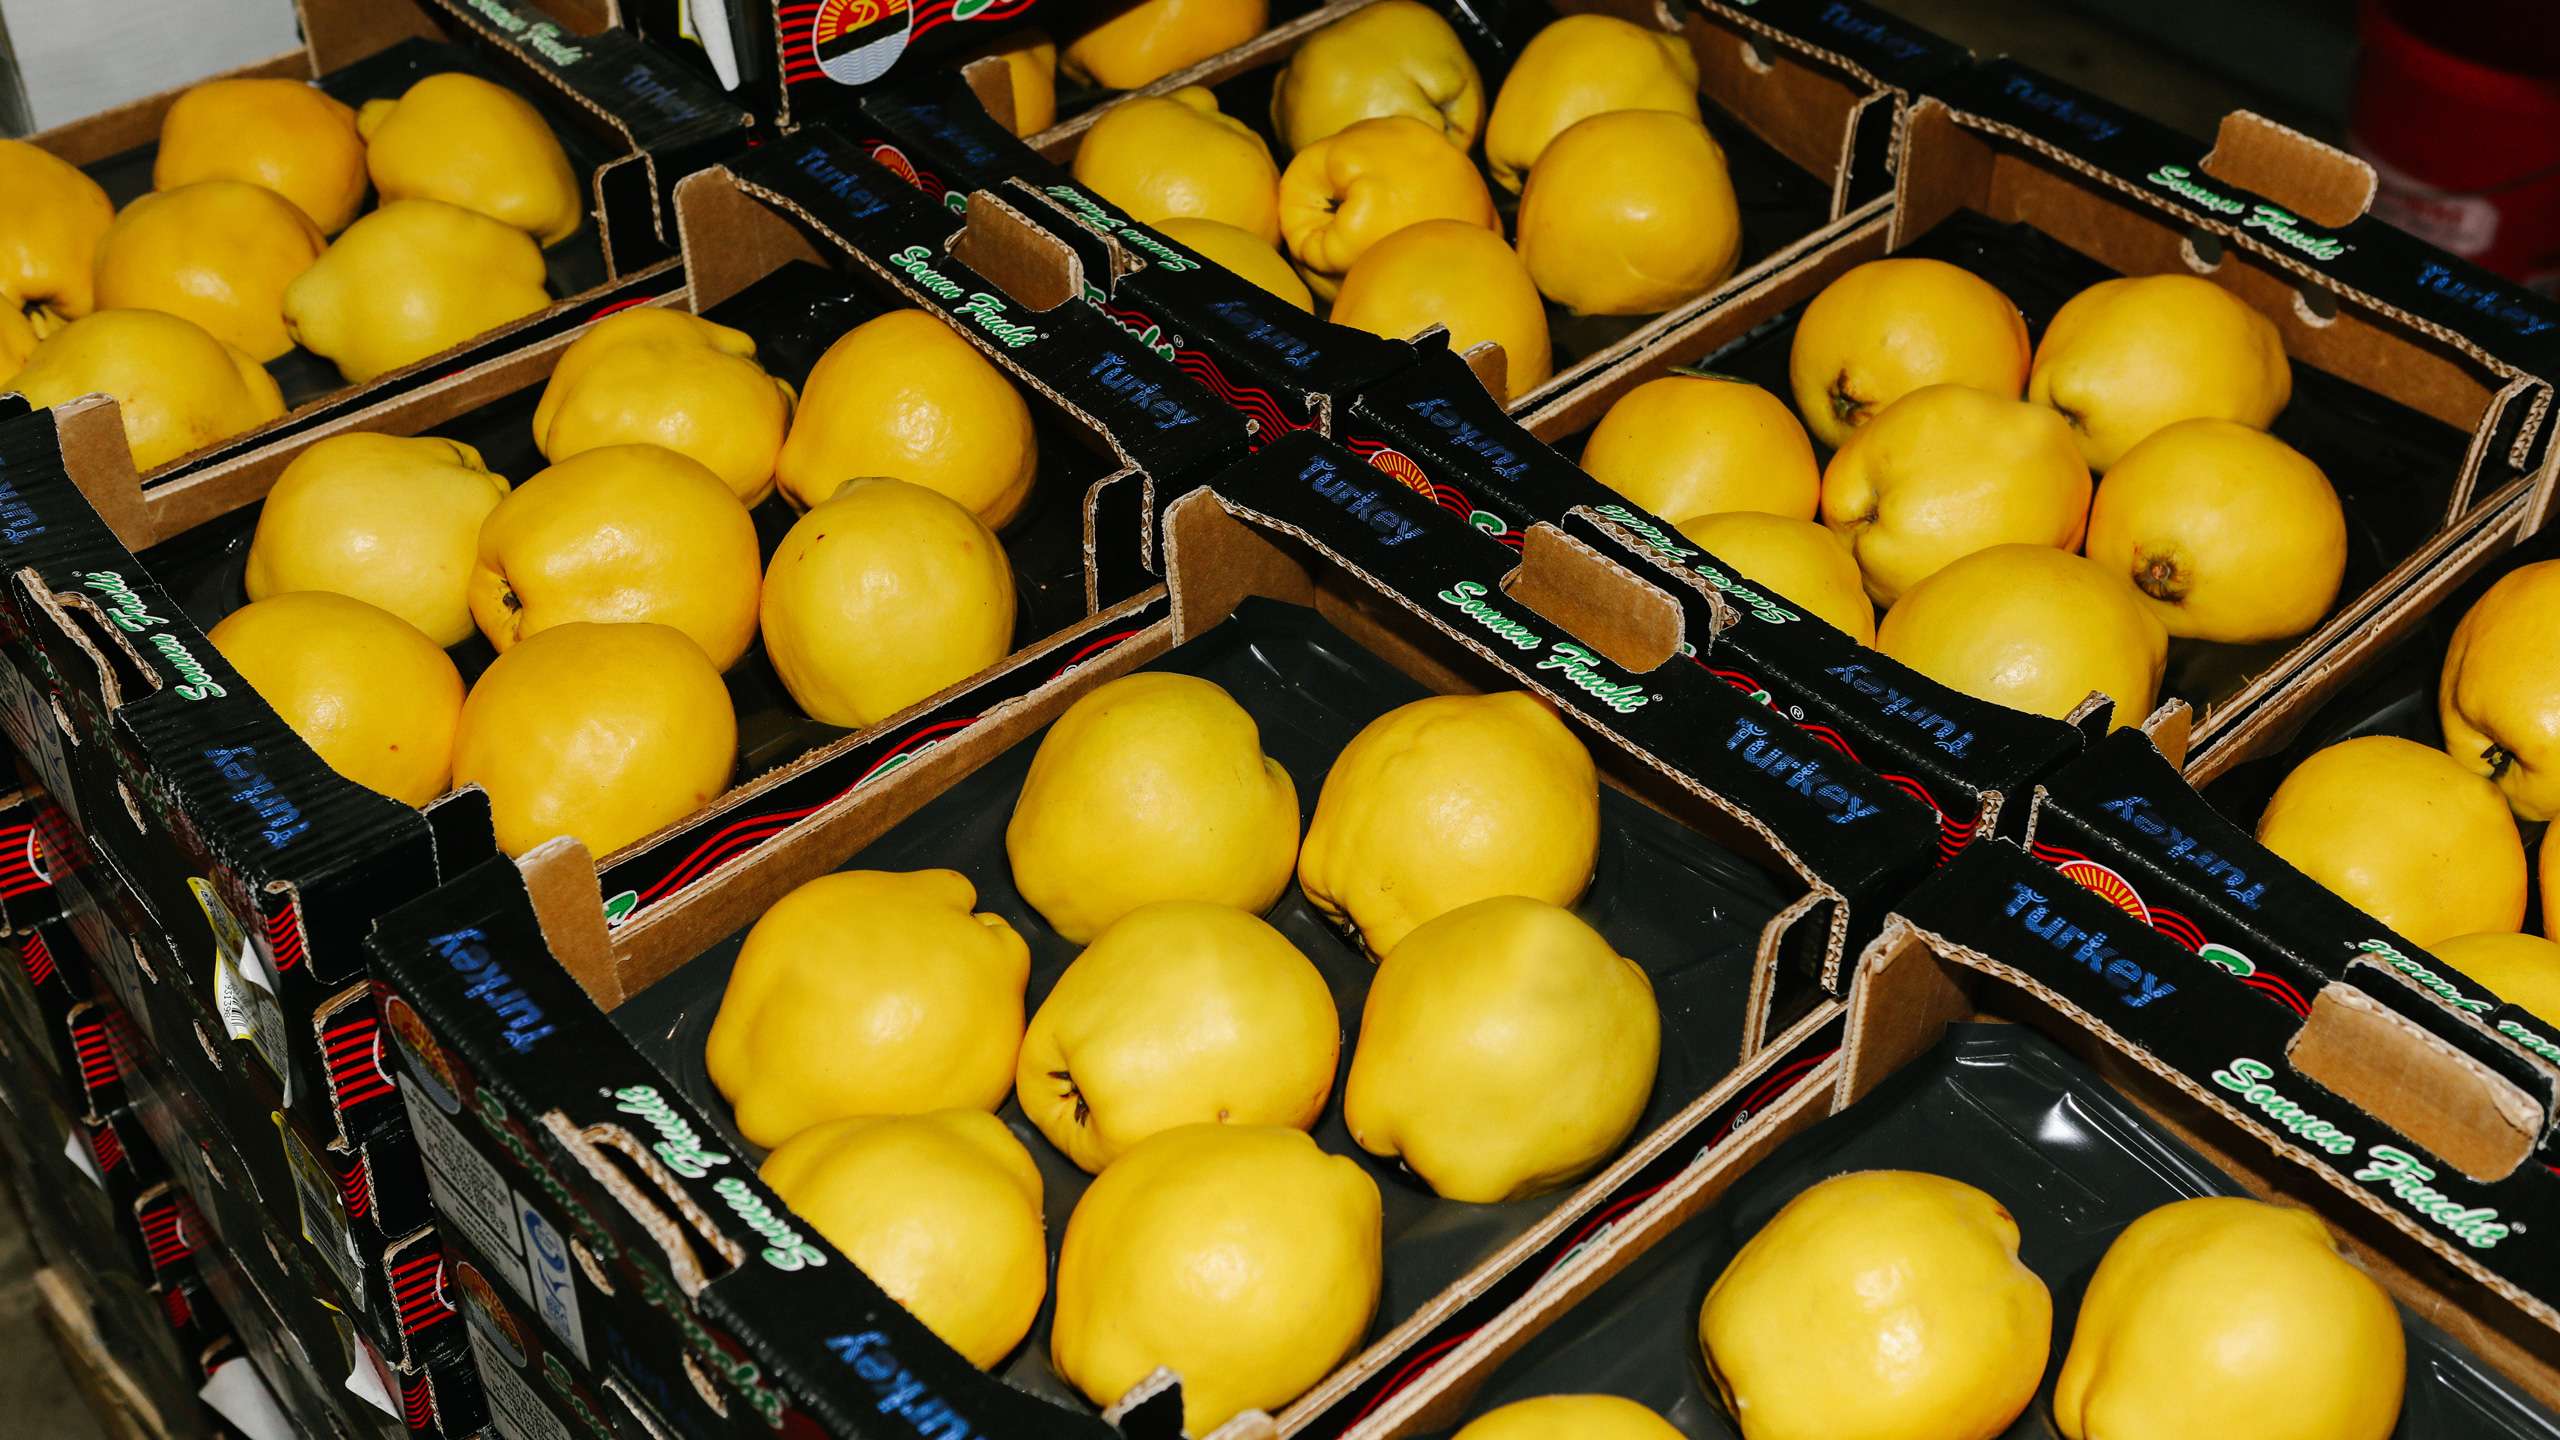 Numerous yellow, fresh fruits lie next to each other in cardboard boxes.